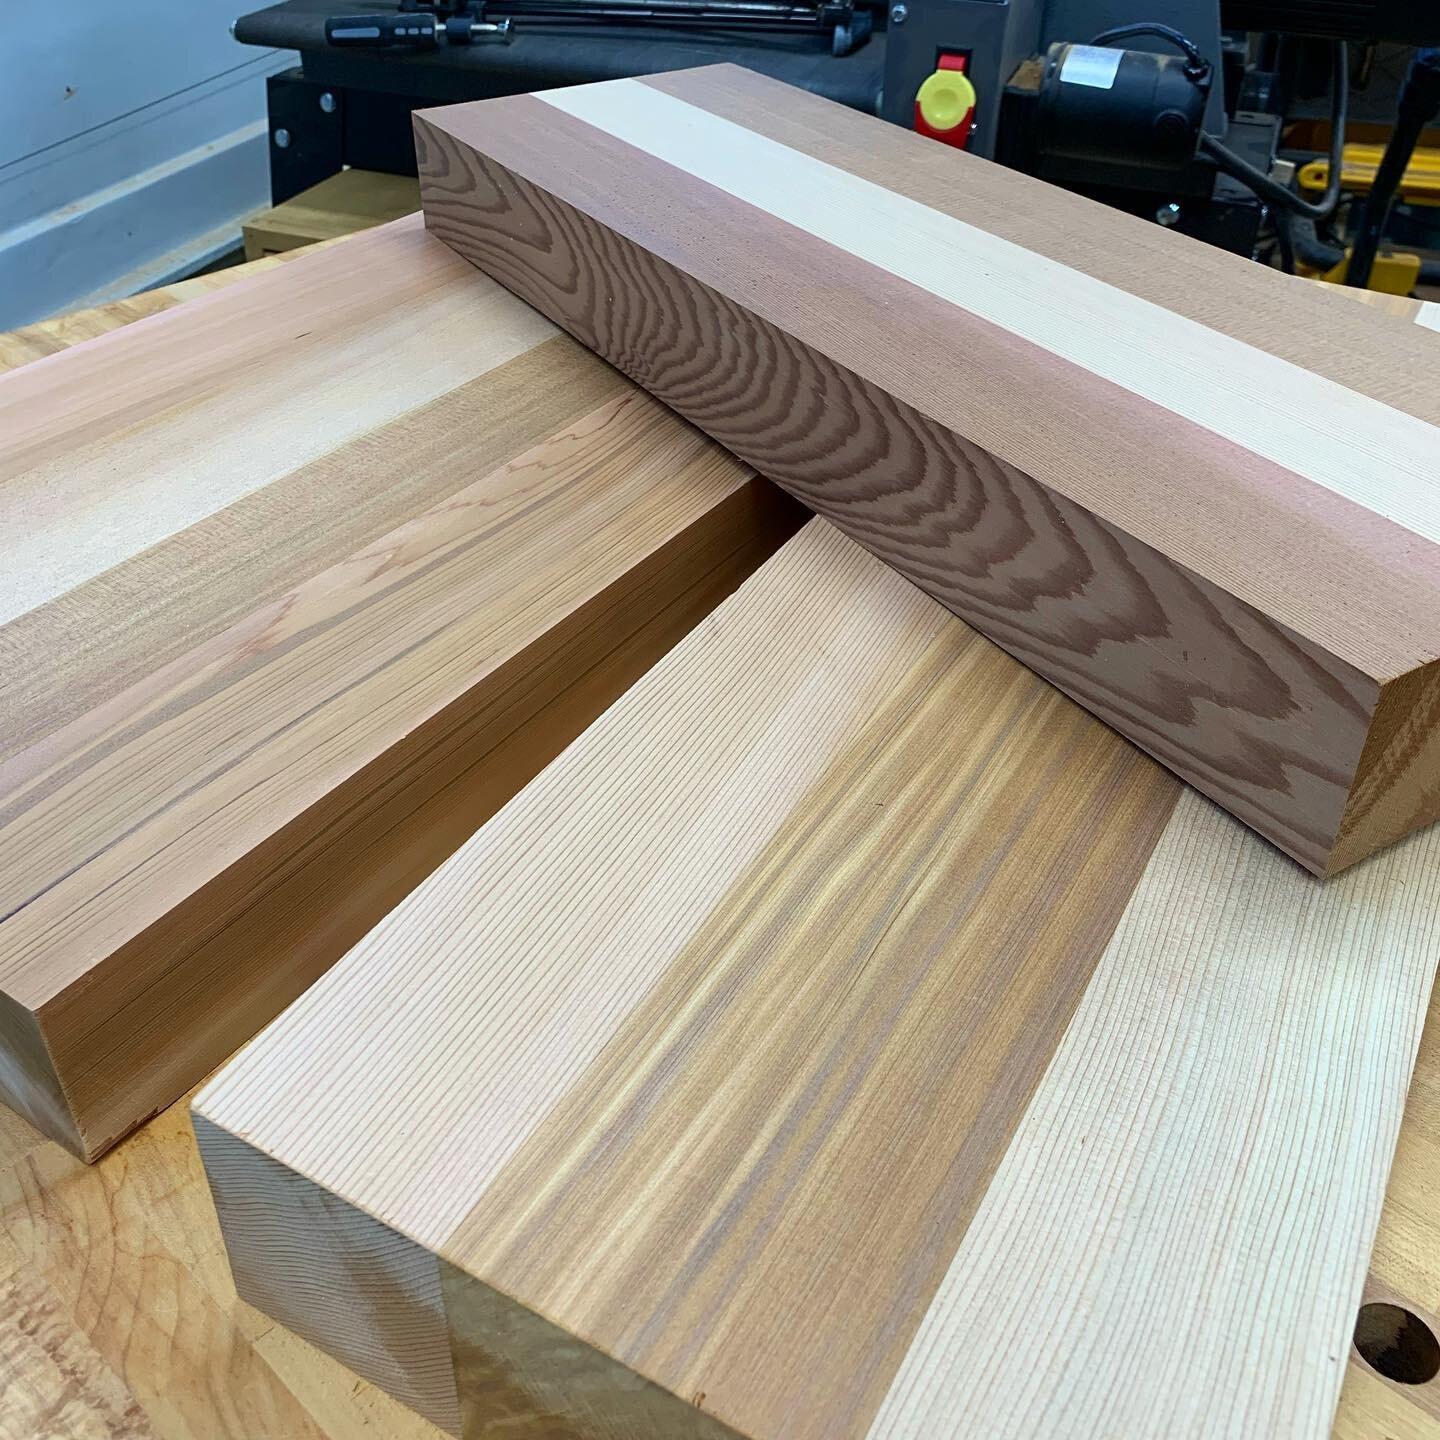 Love all the variation with Cedar. Might not be a hardwood, but still some killer grain and color.